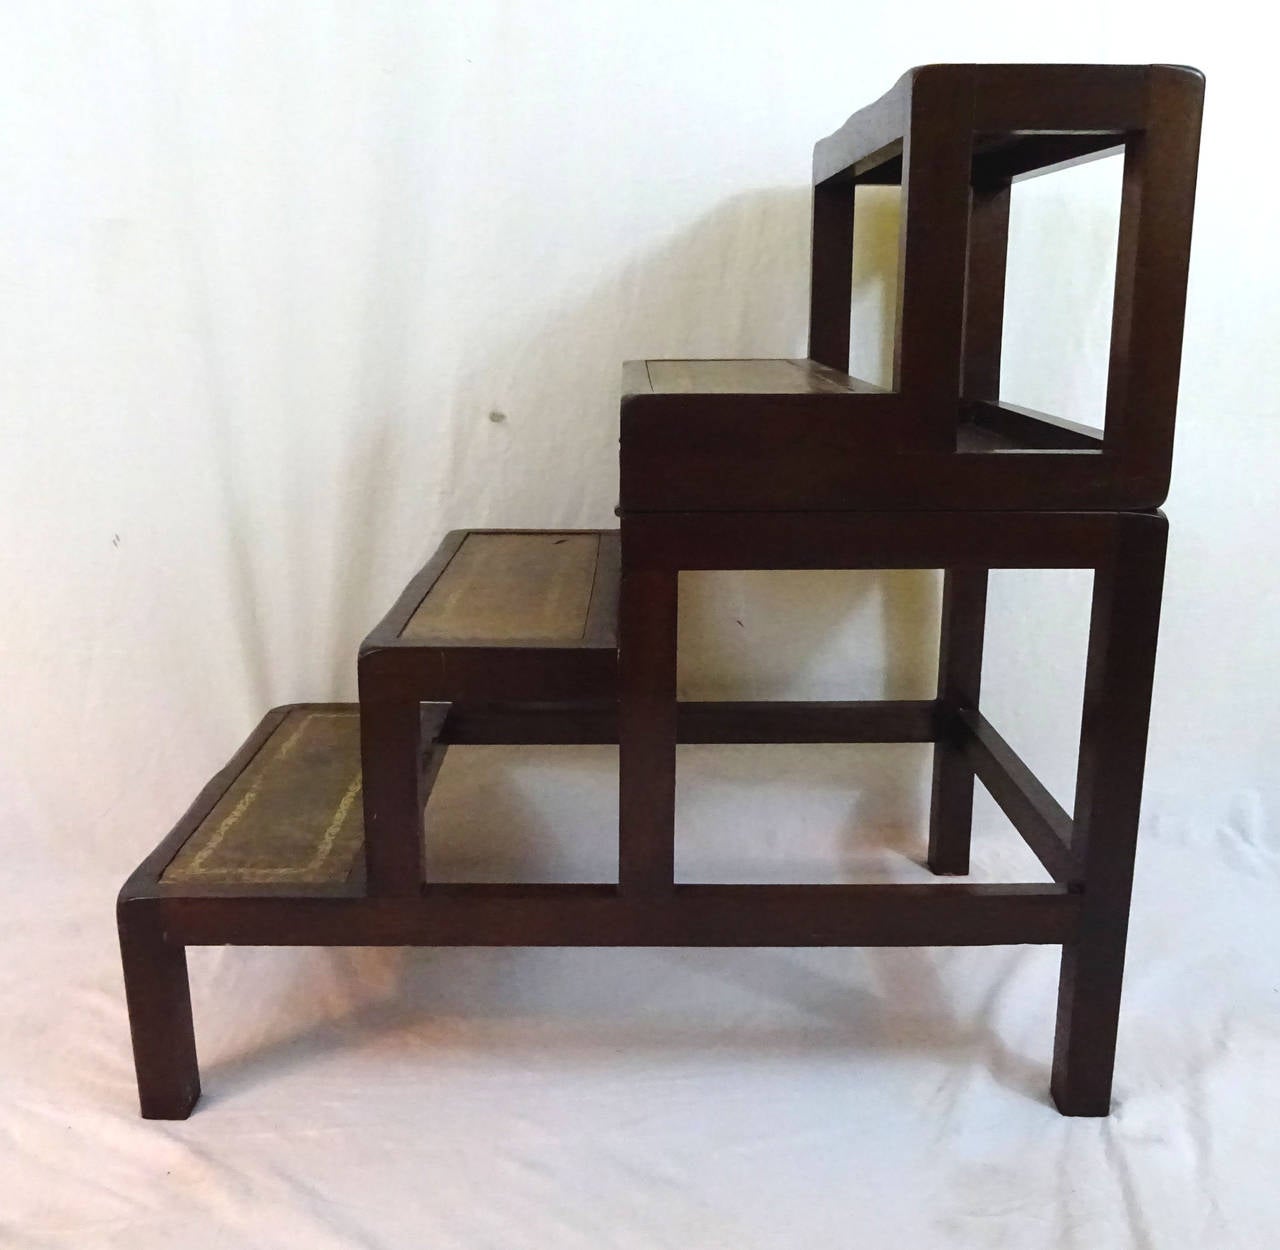 Mahogany and embossed leather metamorphic side table that folds into library steps 28